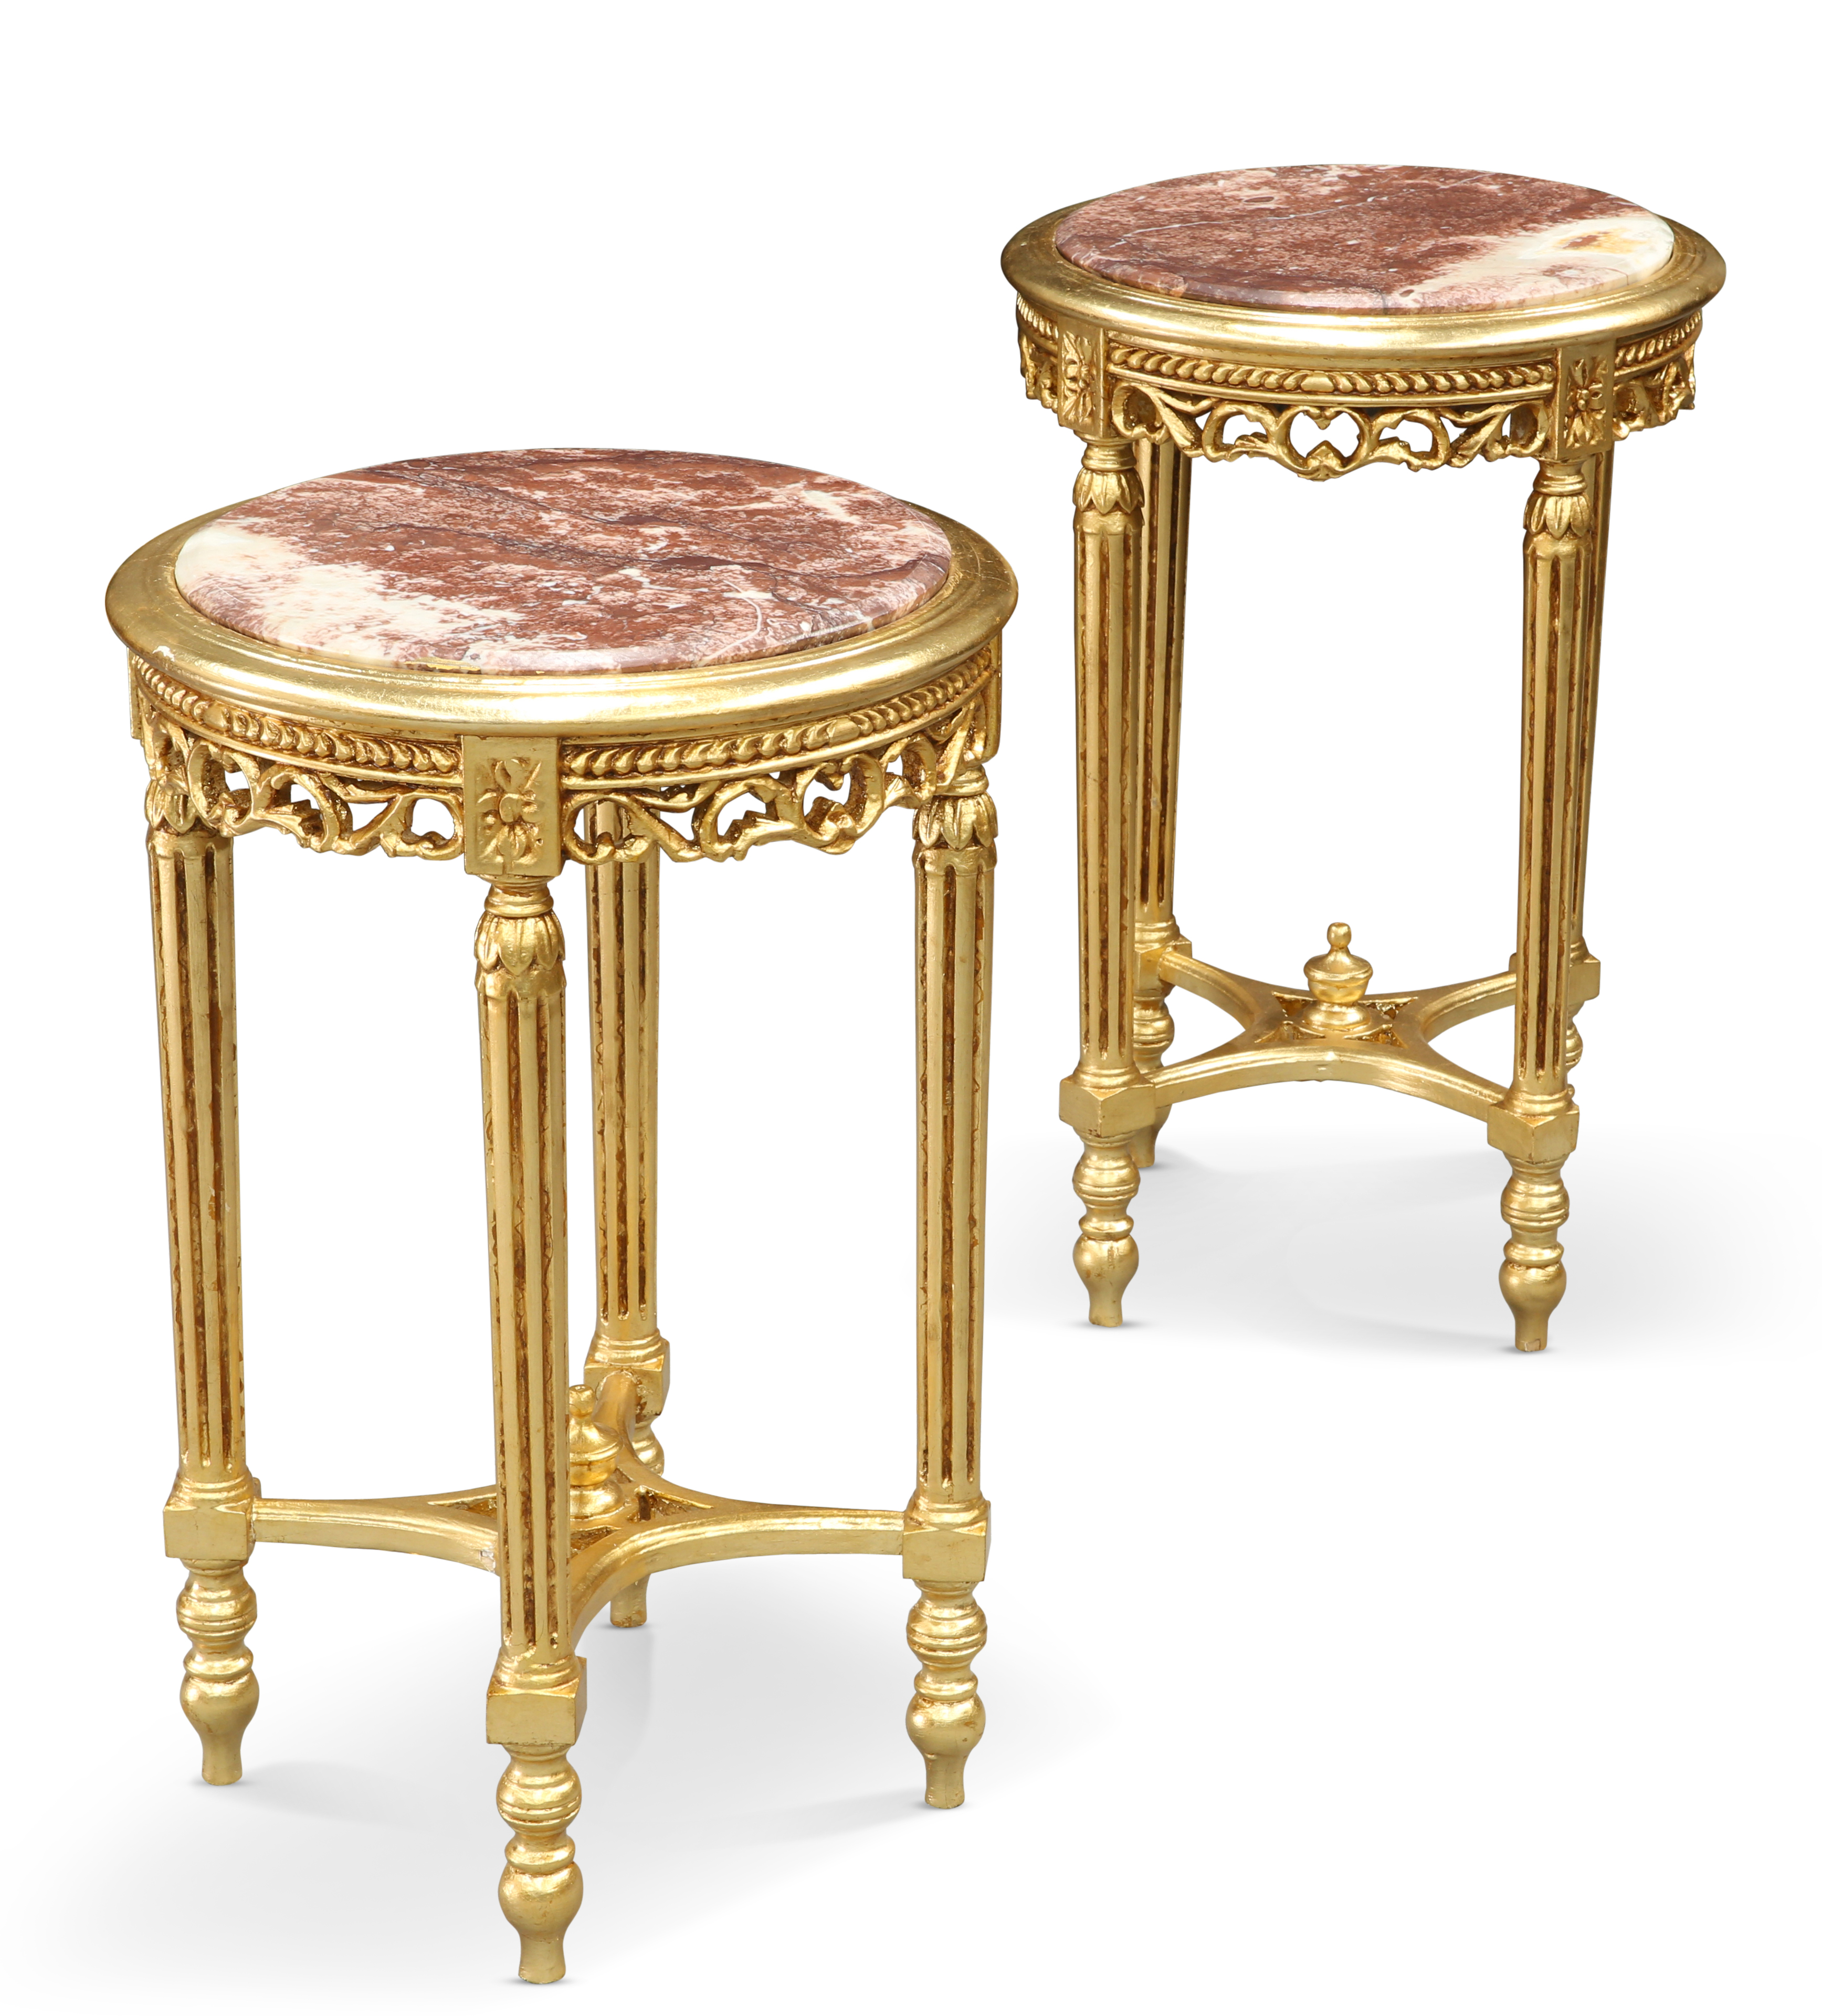 A PAIR OF MARBLE-TOPPED GILT OCCASIONAL TABLES